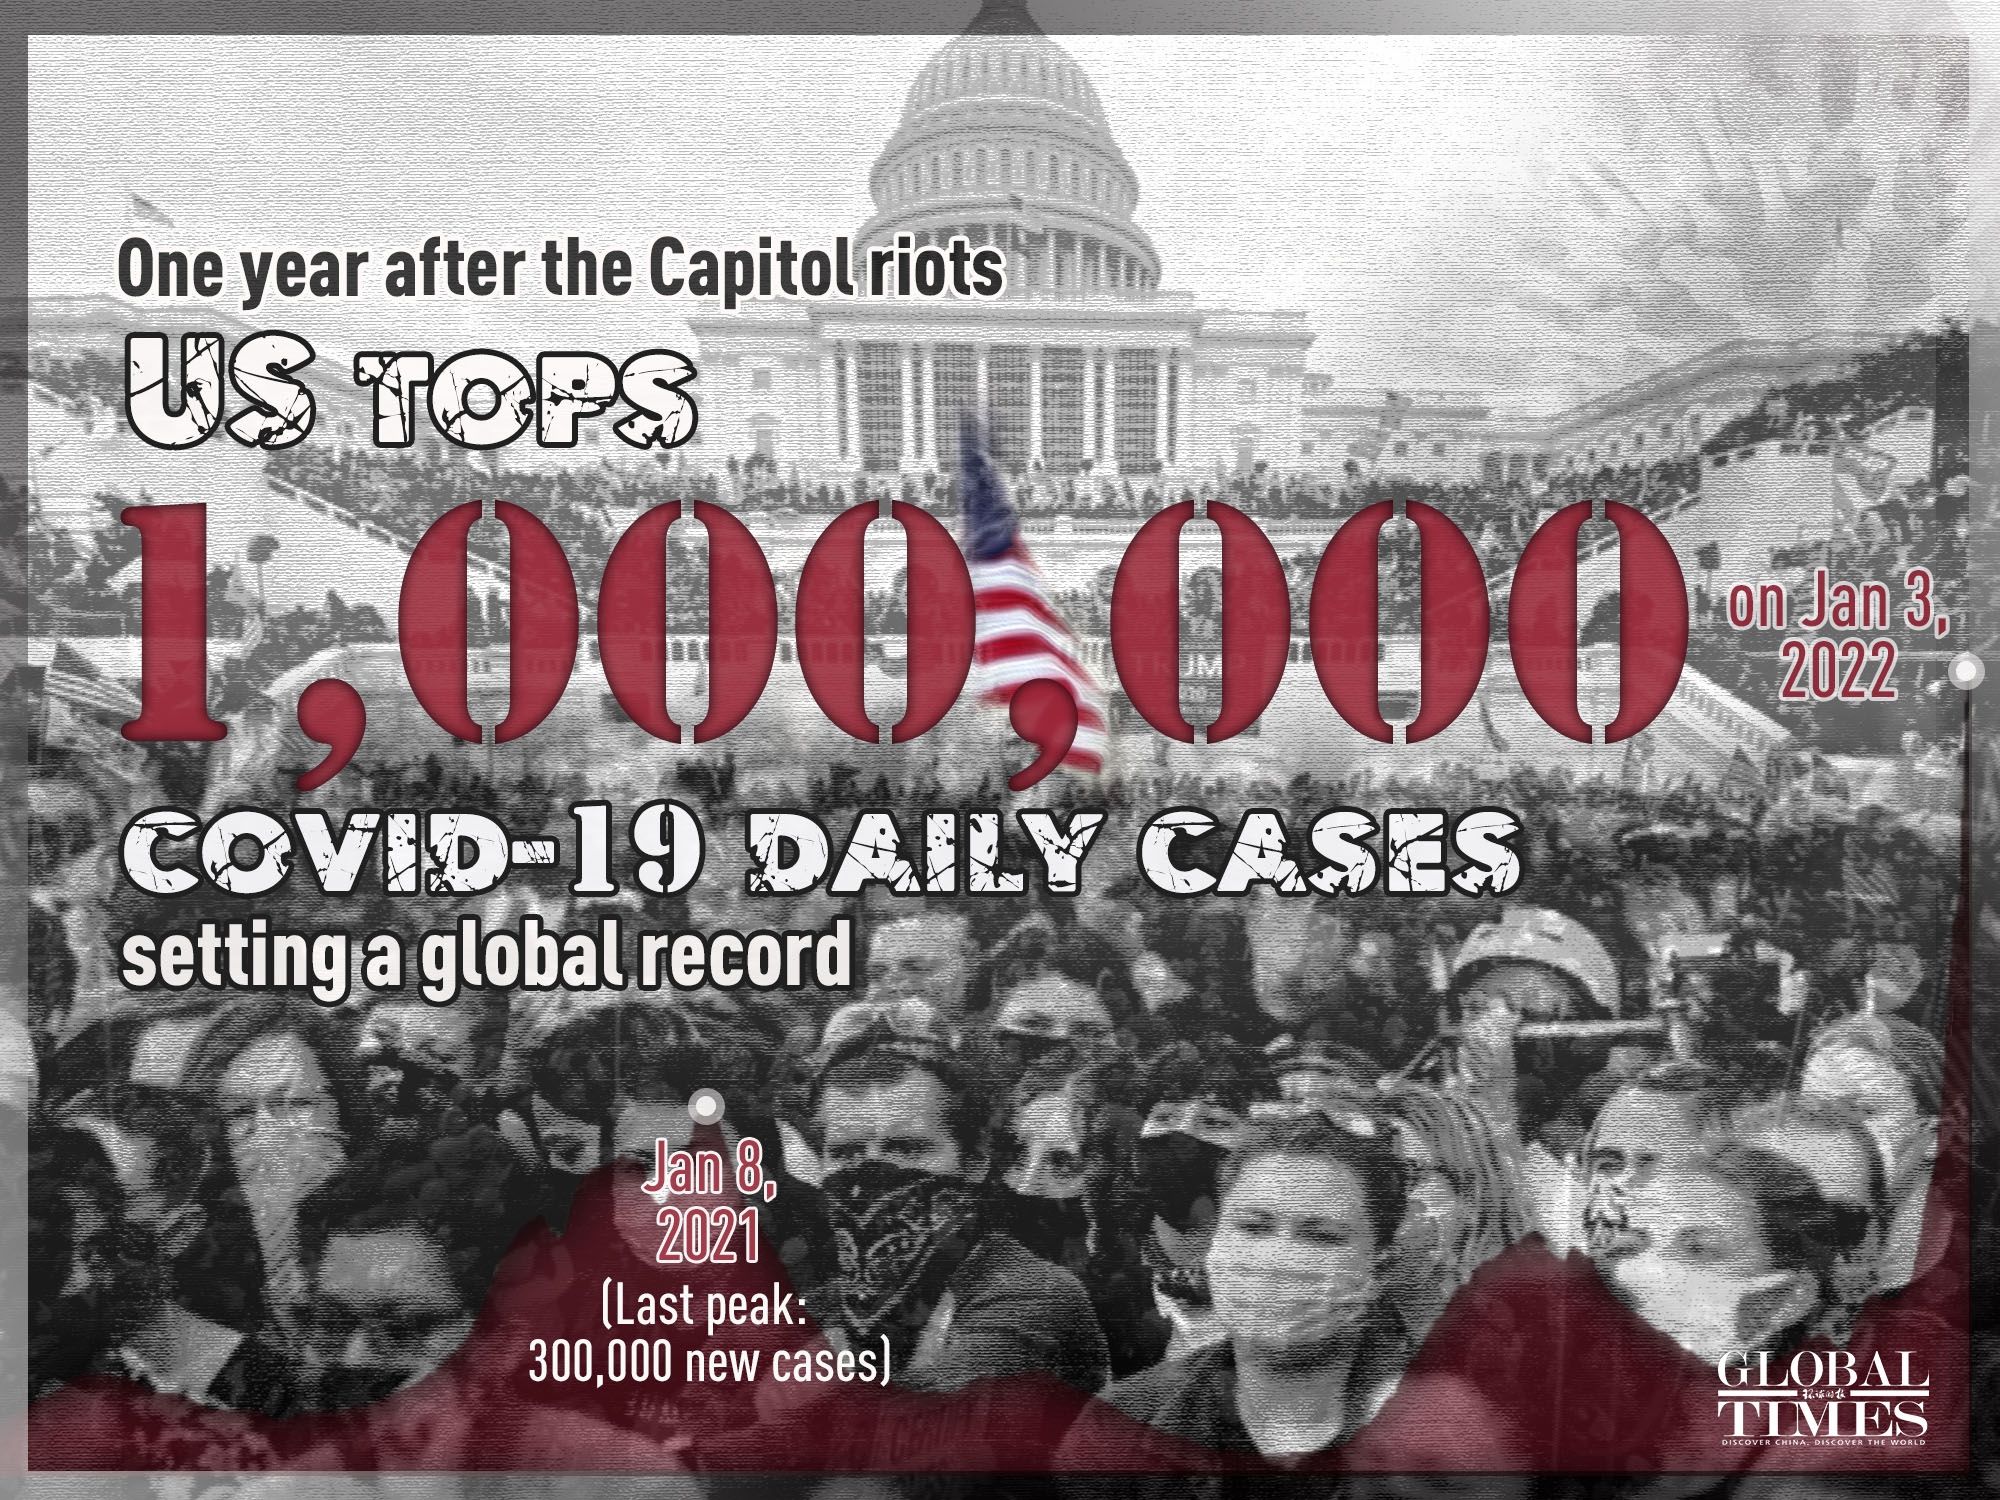 The US set a global record with over 1 million COVID-19 daily cases on Jan 3, one year after the country reached its last peak in single-day cases in 2021, days after the Capitol riots.